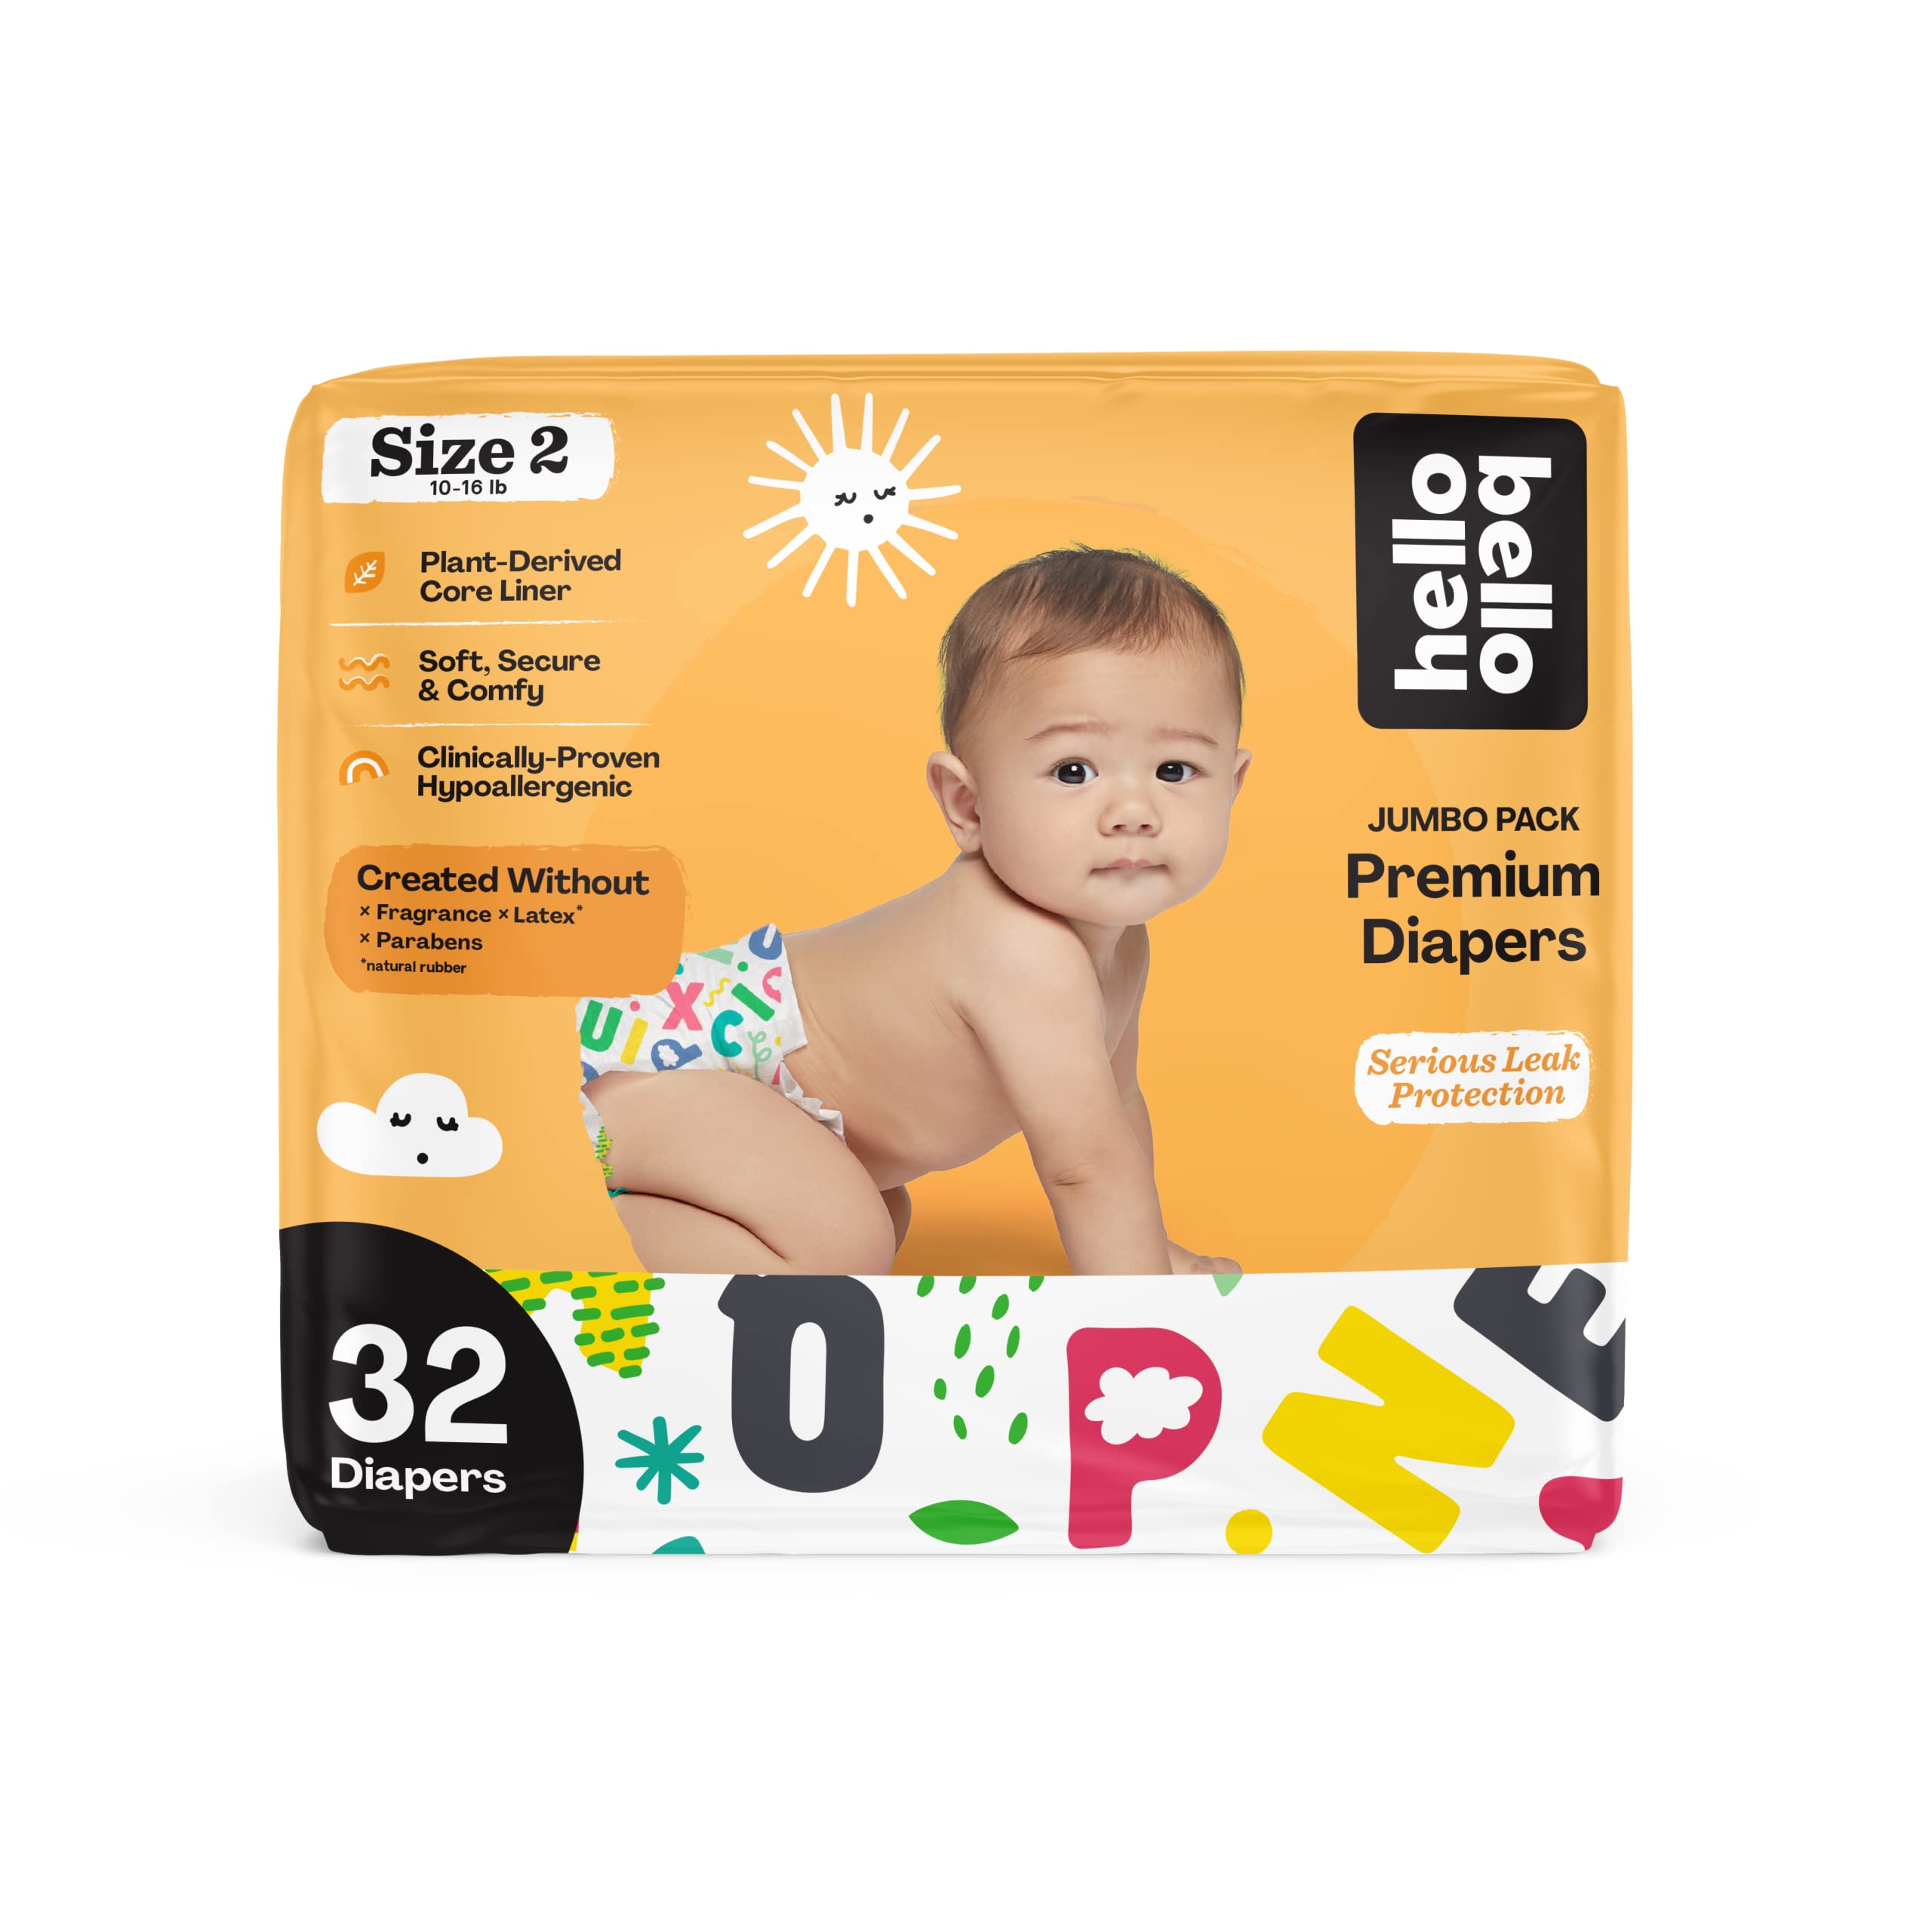 Hello Bello Premium Baby Diapers Size 2 I 32 Count of Disposeable, Extra-Absorbent, Hypoallergenic, and Eco-Friendly Baby Diapers with Snug and Comfort Fit I Alphabet Soup